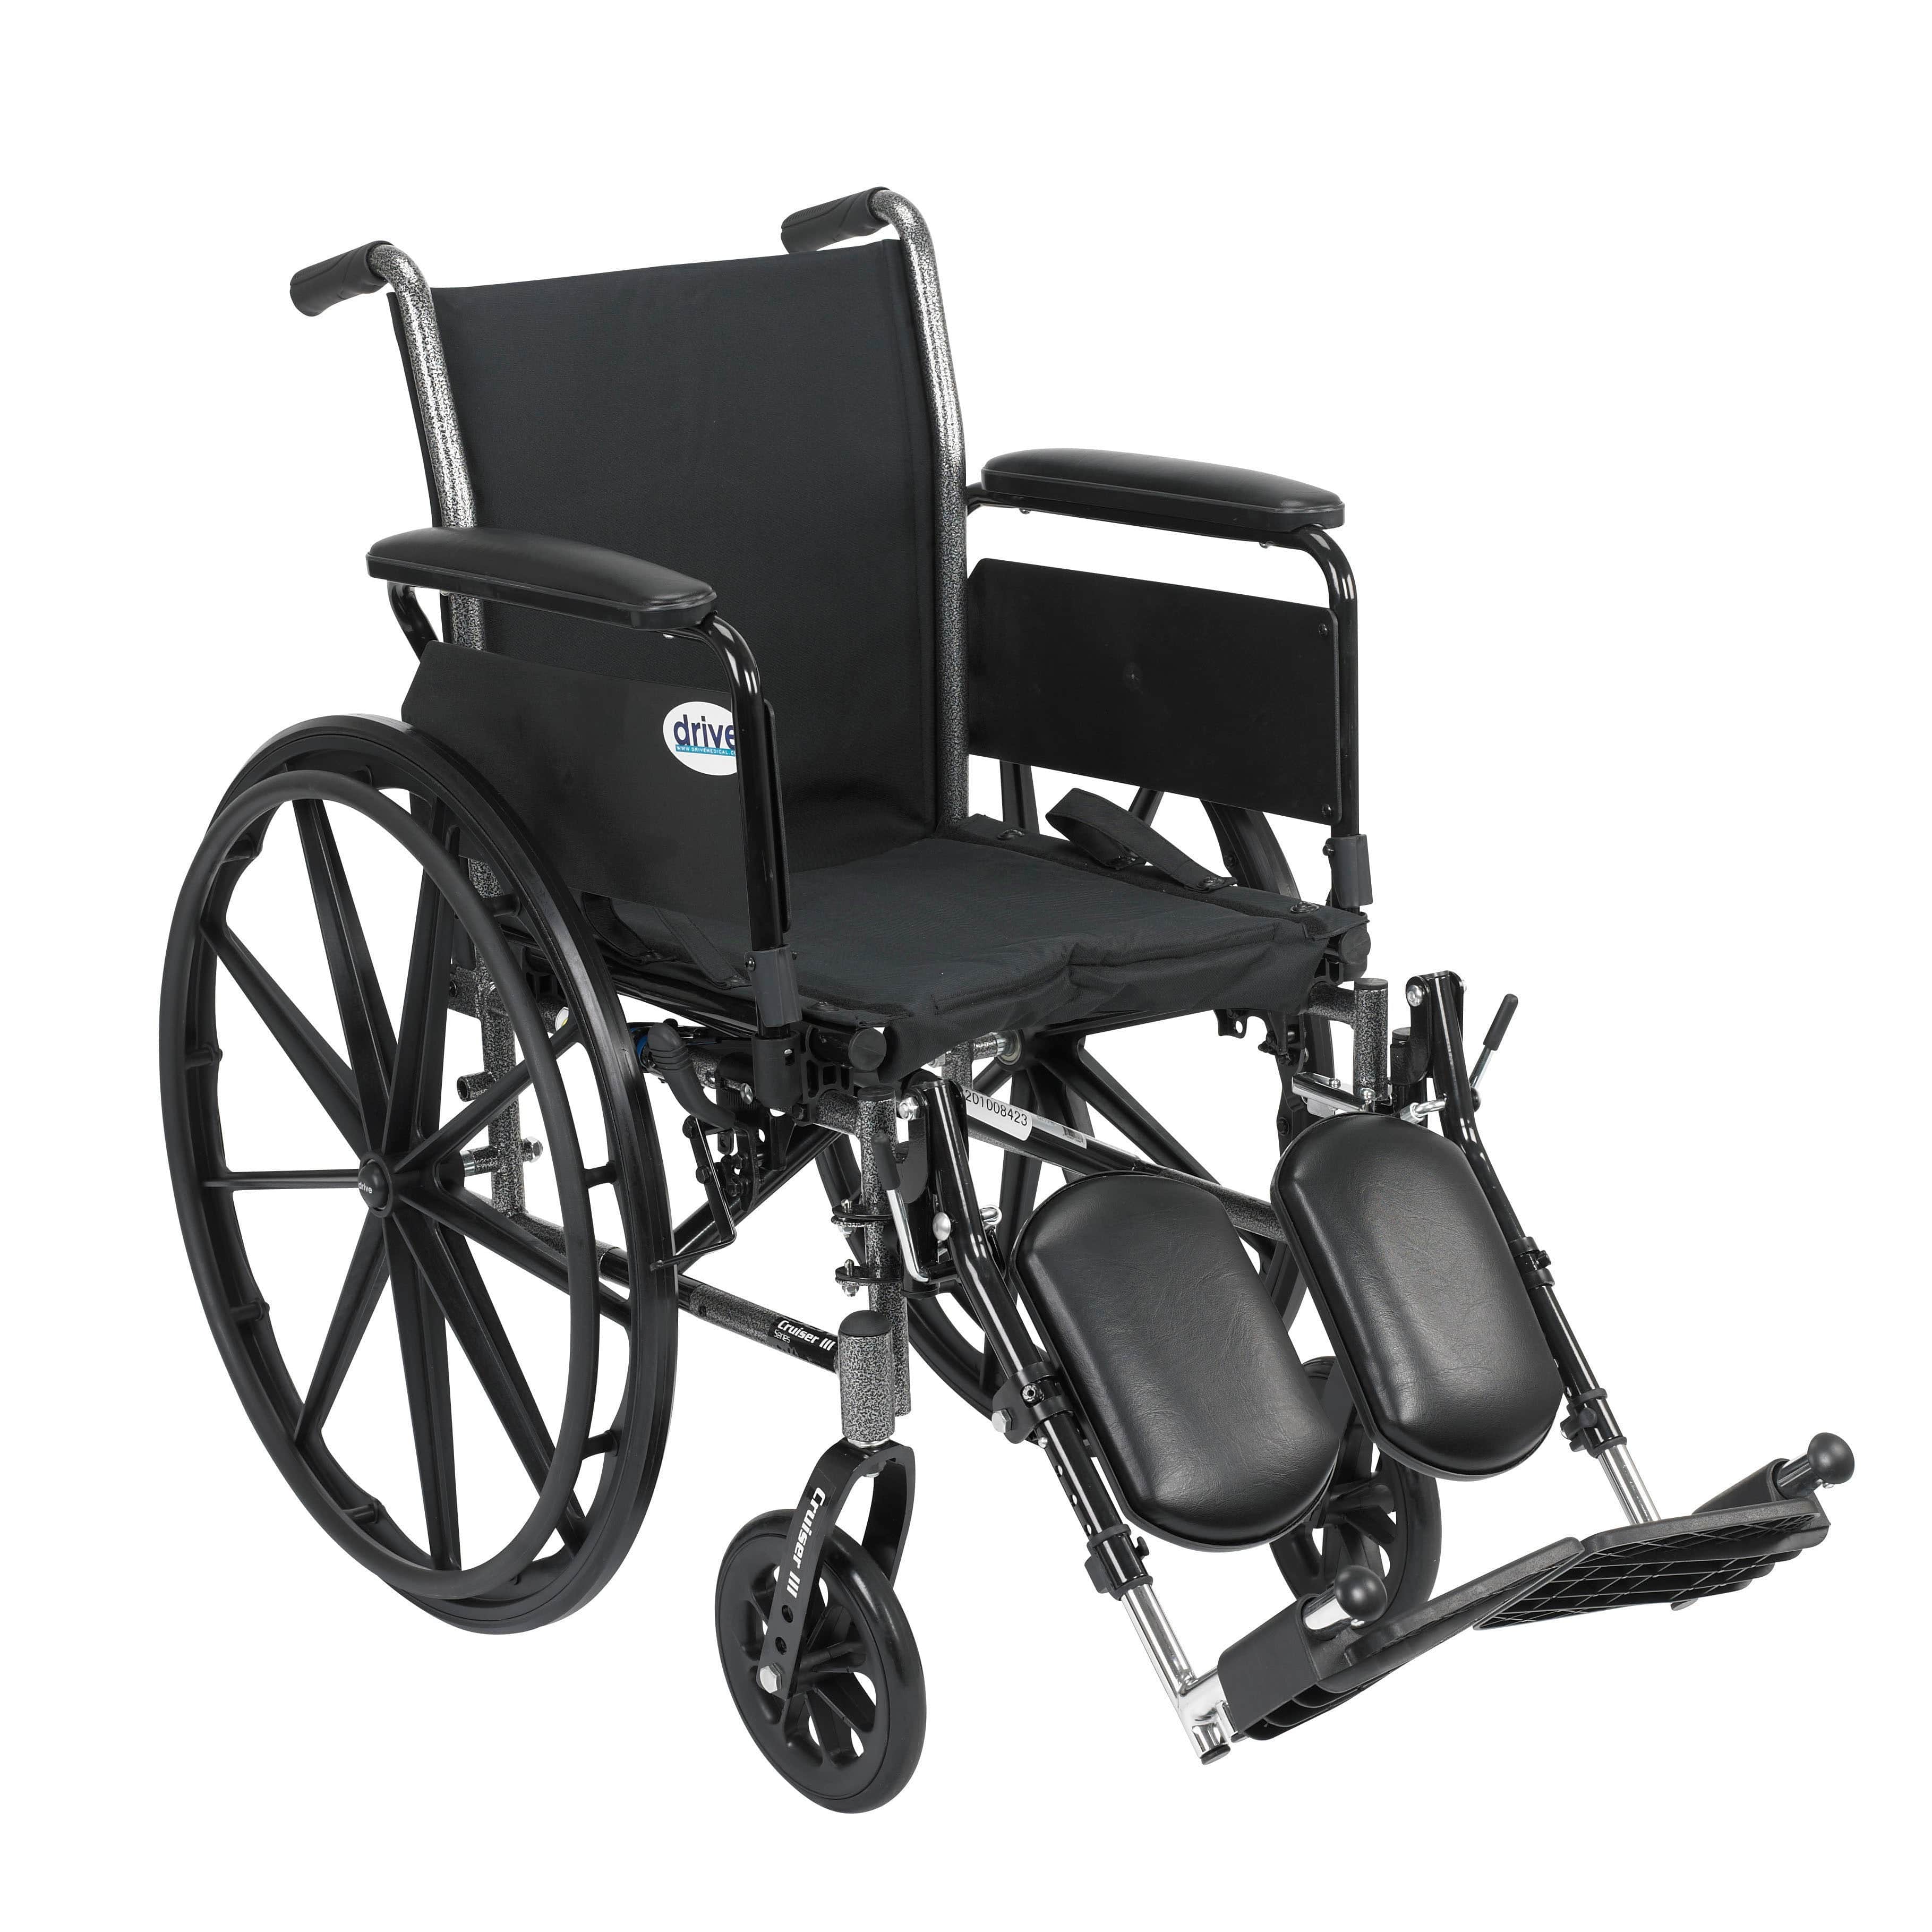 Drive Medical Wheelchairs Flip Back Removable Full Arms and Elevating Leg Rests / 16" Seat Drive Medical Cruiser III Light Weight Wheelchair with Flip Back Removable Arms